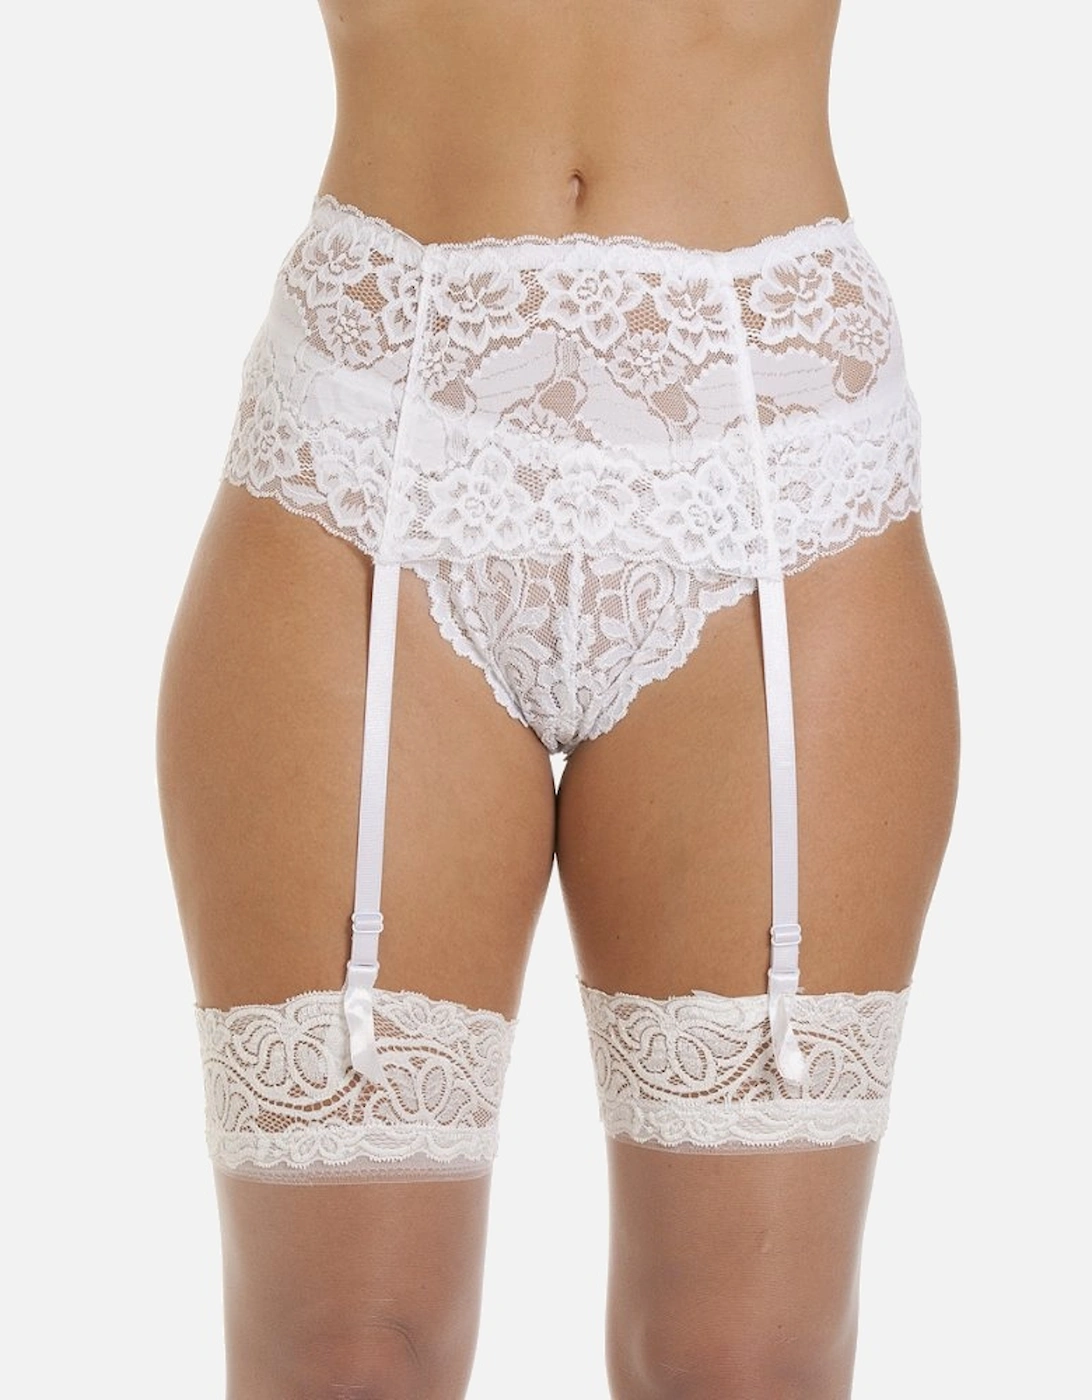 Camille Women's Suspender Belt White Wide Lace Lingerie with Ribbon Strap, 7 of 6